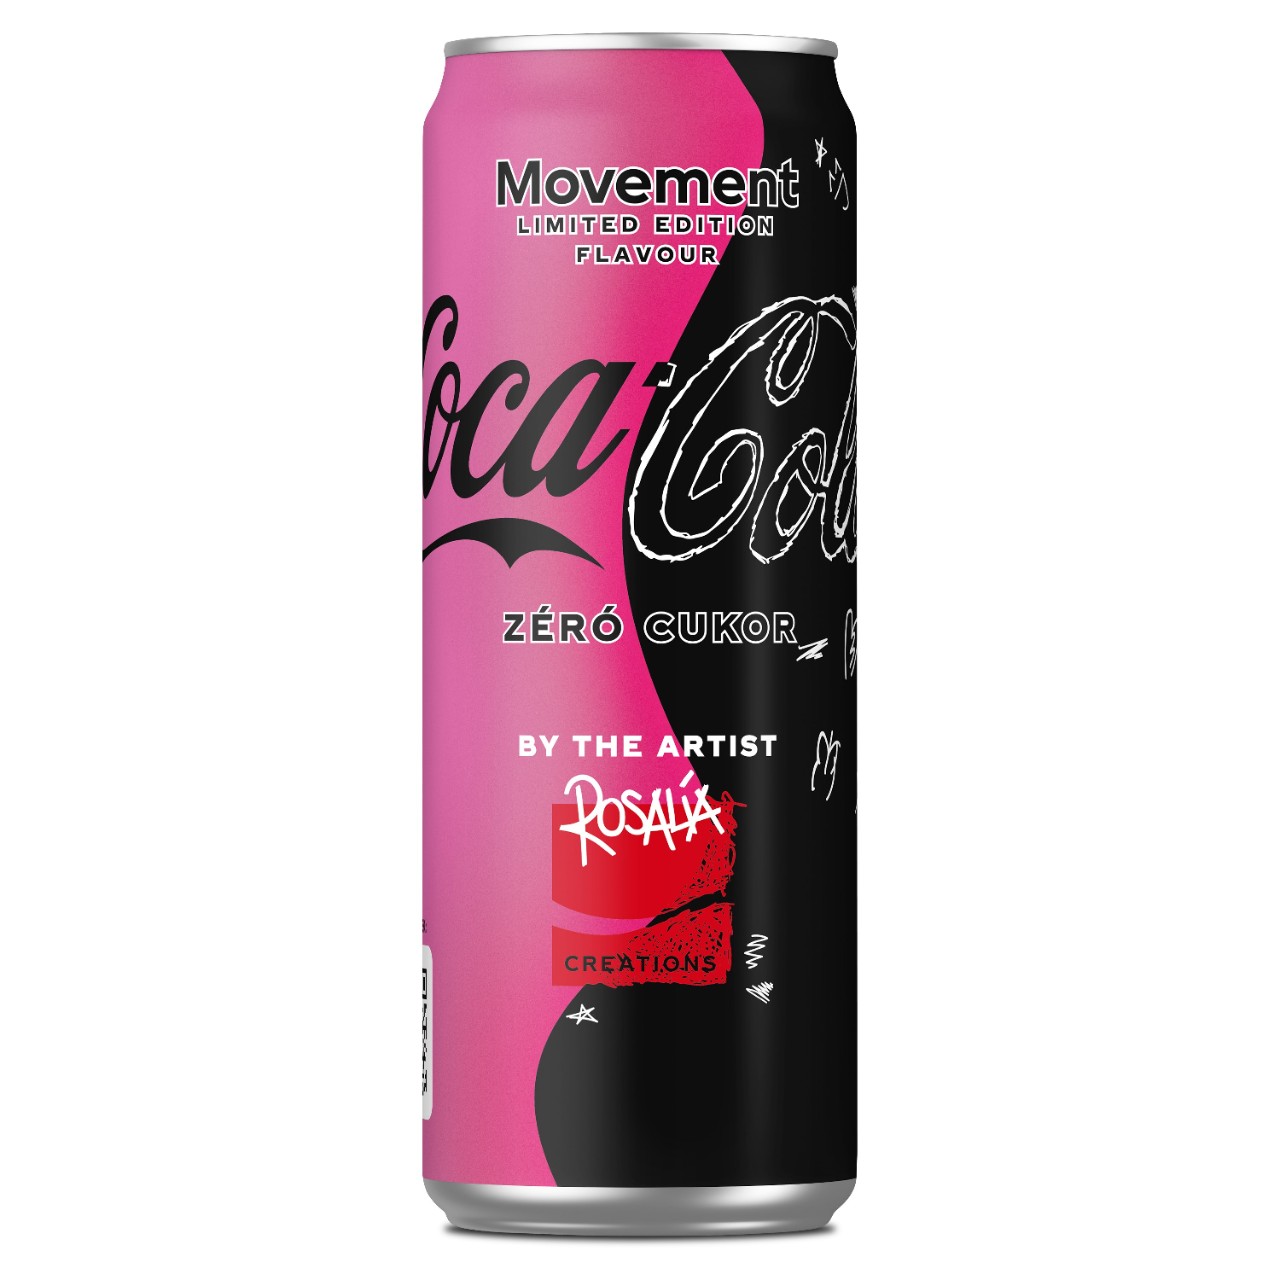 CocaCola launches a new limitededition drink called CocaCola Movement